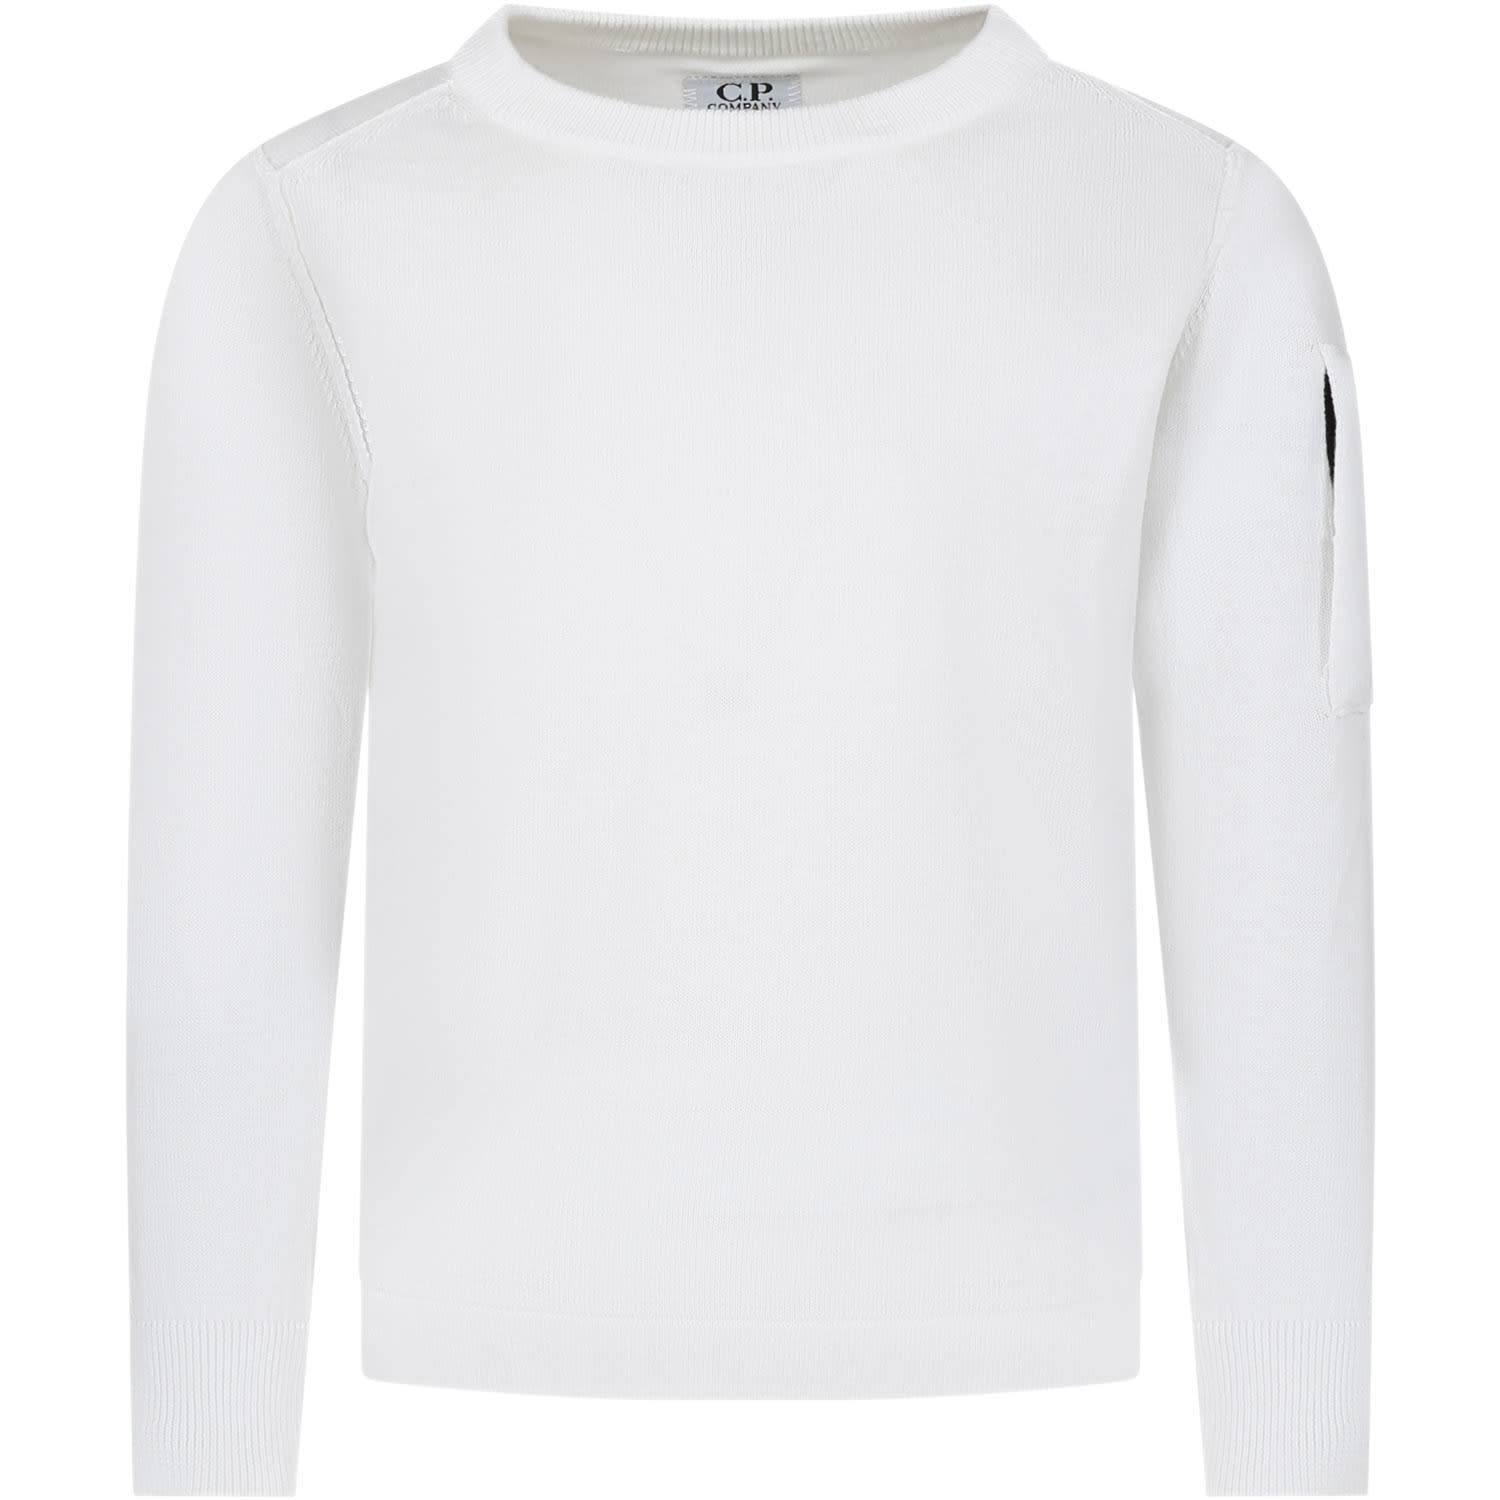 C.p. Company Undersixteen Kids' White Sweater For Boy With C.p. Company Lens